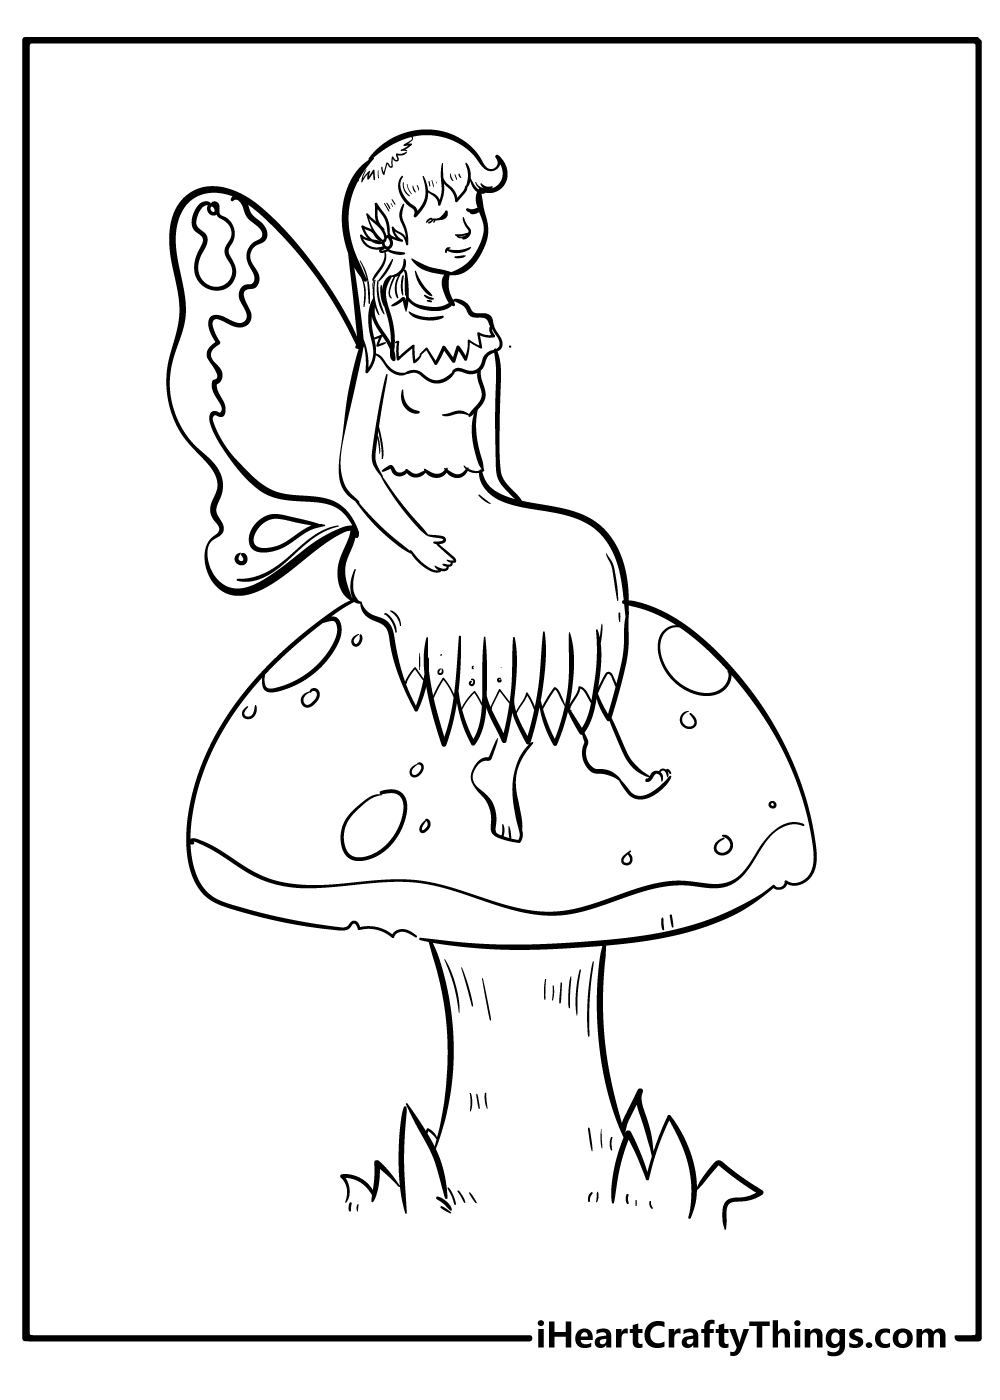 Fairy Coloring Pages for kids free download